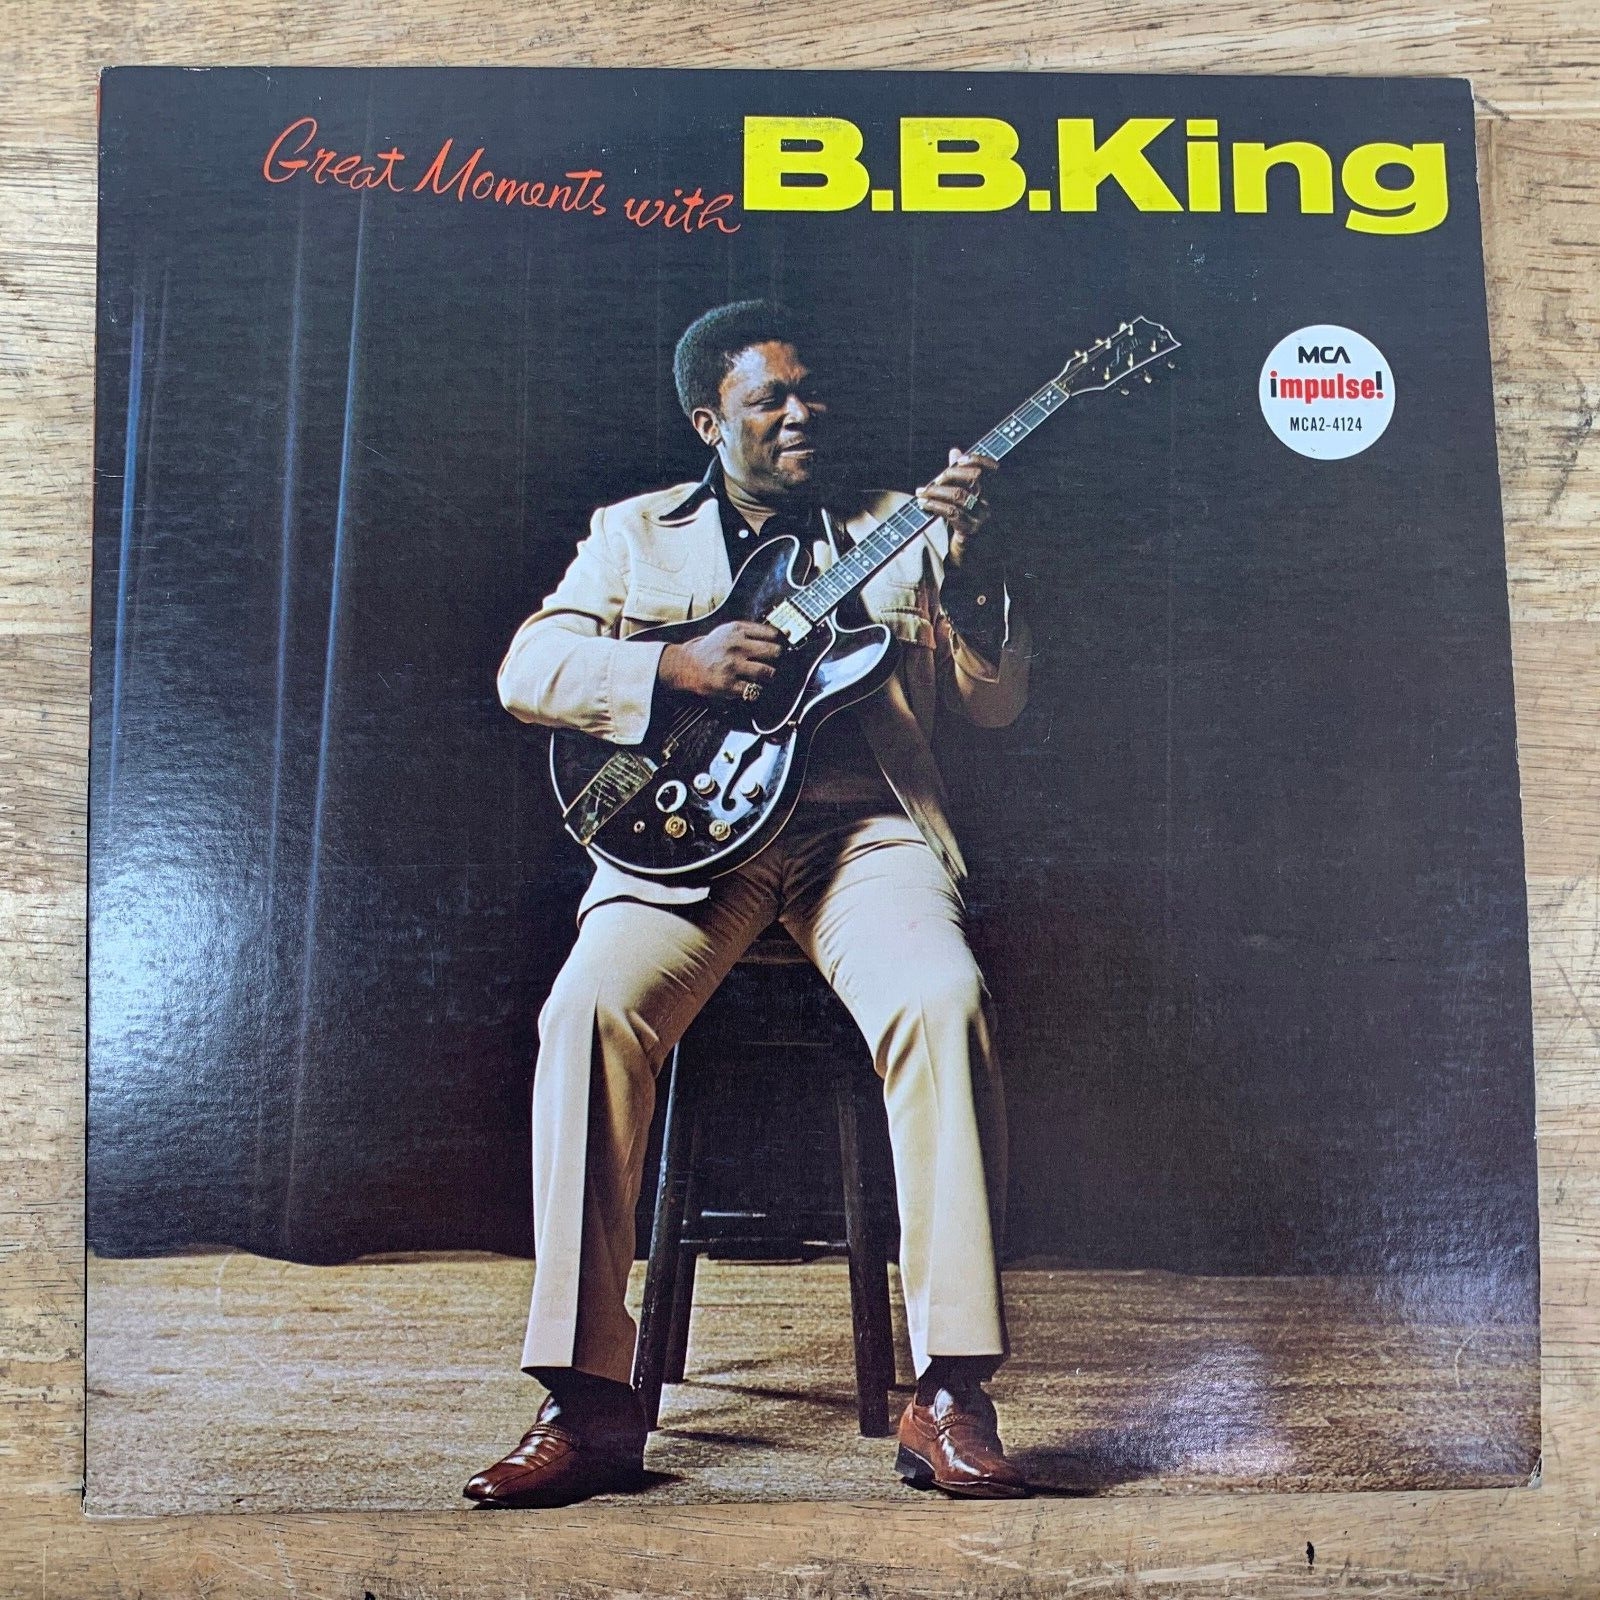 Great Moments with B.B. BB King Double LP 1980 MCA Records MCA2-4124